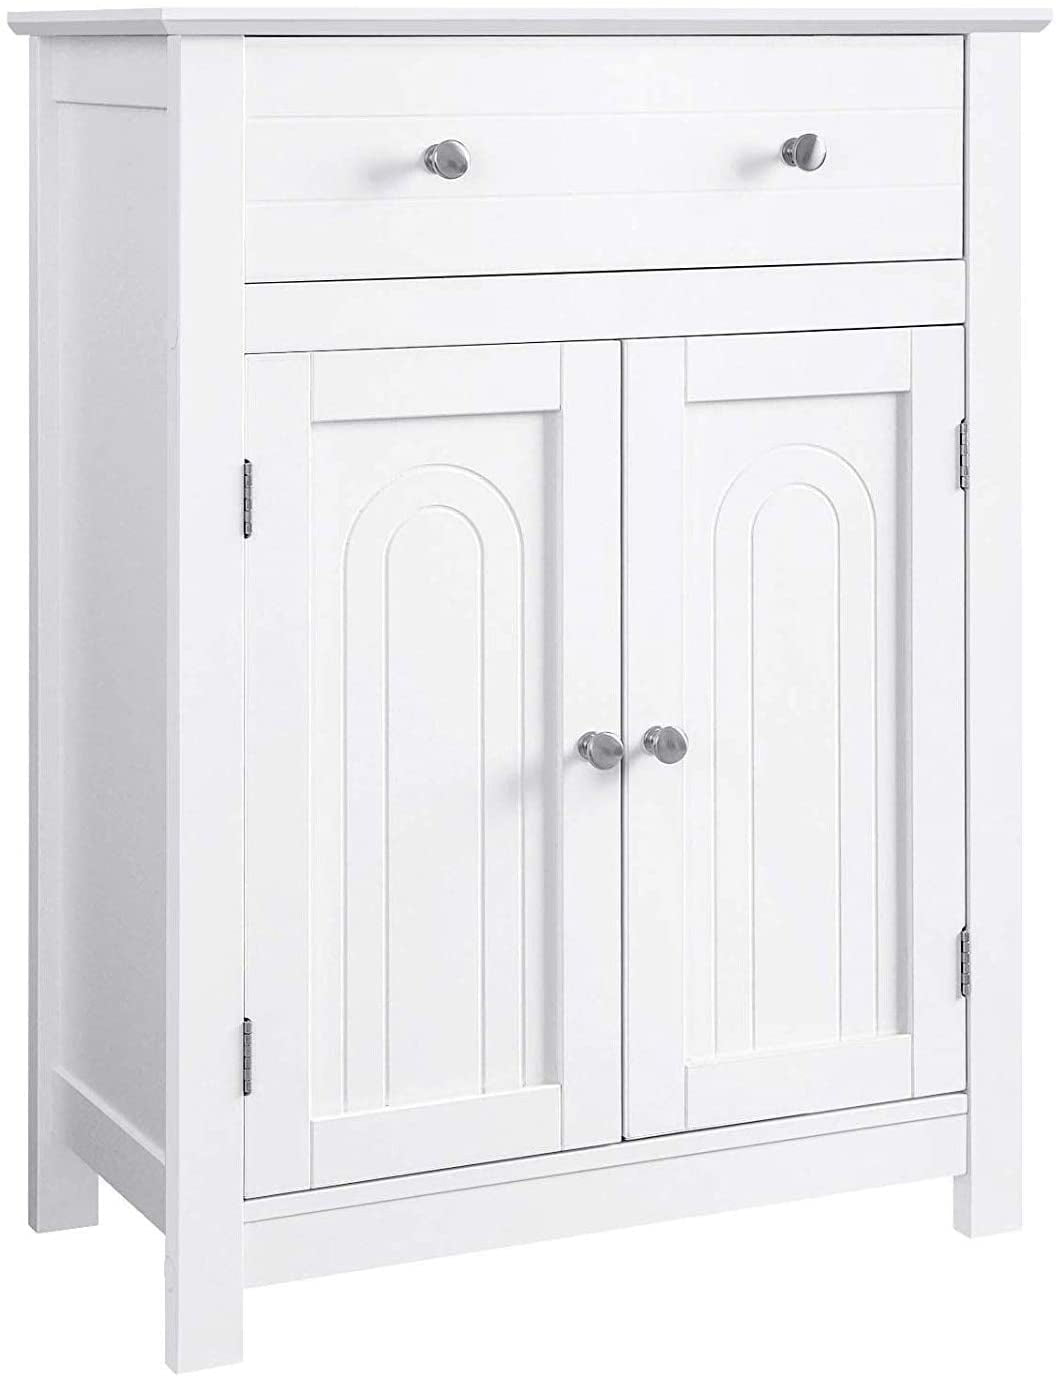 Freestanding Storage Cabinet with Drawer Matte White UBBC142W01 29.5 x 11.8 x 31.5 Inches 3 Open Compartments Adjustable Shelves VASAGLE Bathroom Cabinet Floor Cabinet Scandinavian Style